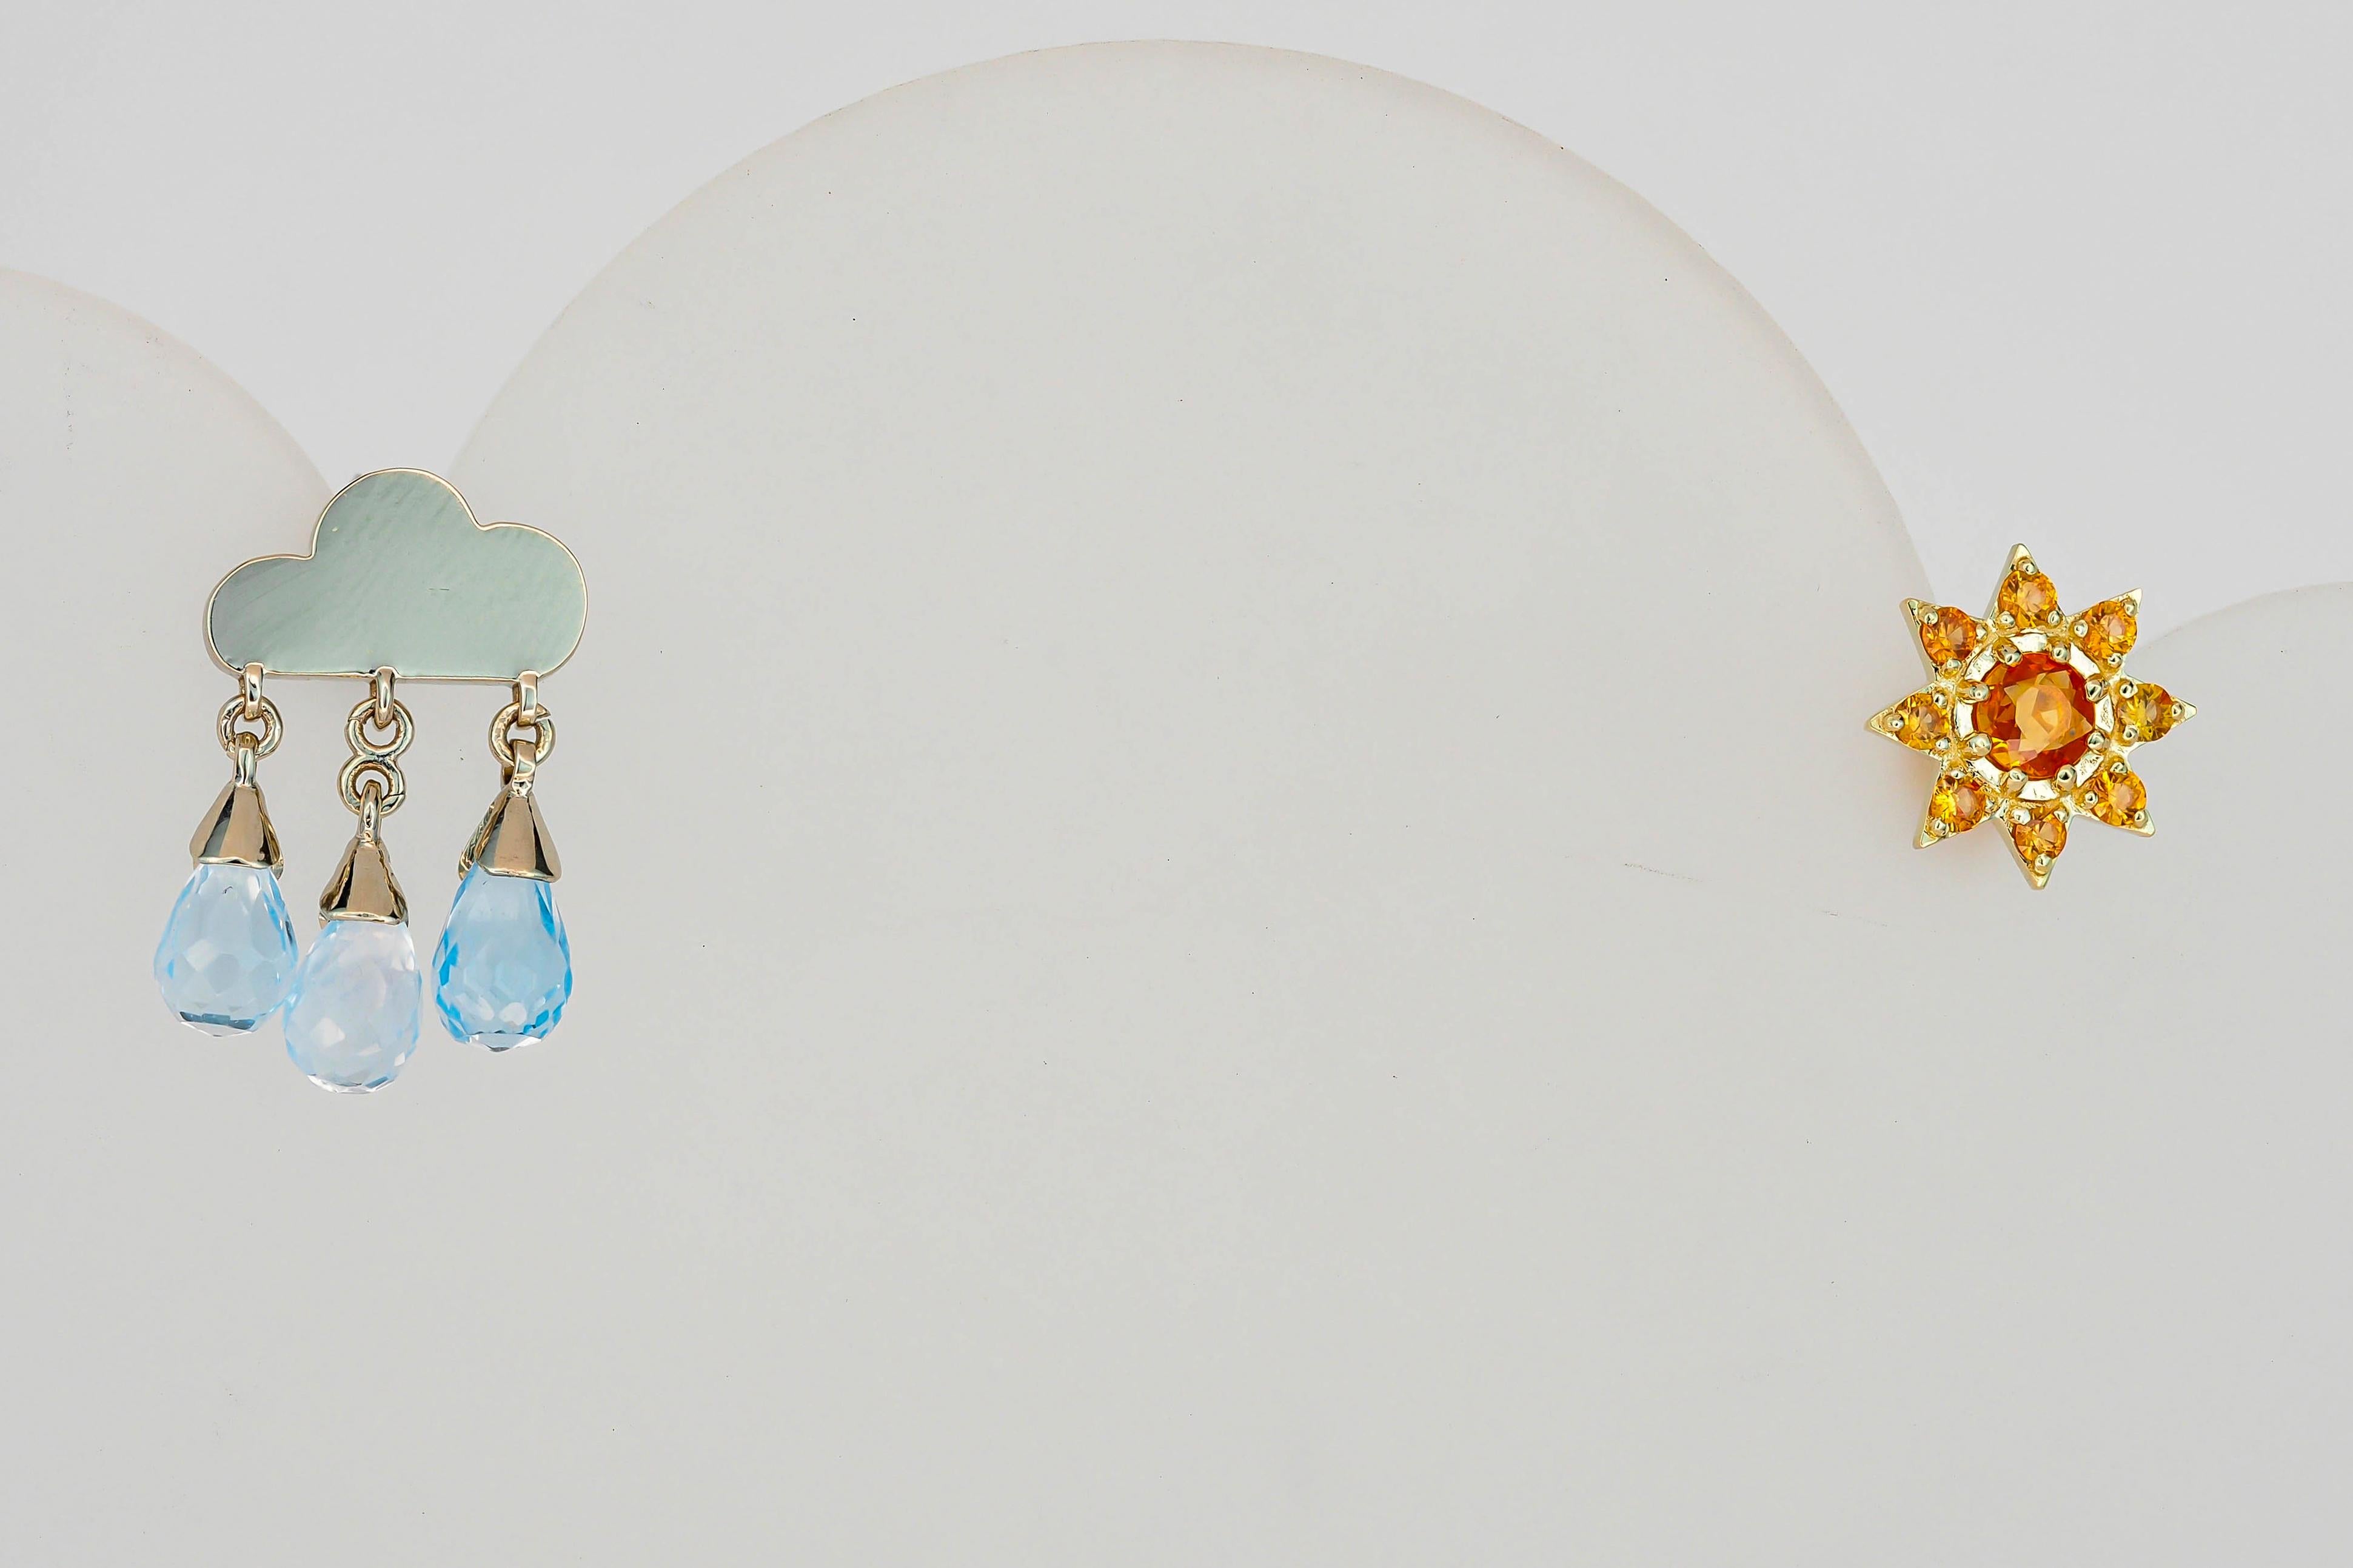 Sun and rain cloud 14 karat gold earrings studs. Orange sapphire studs. Mismatched Sun and Rain Cloud  Earrings.

14 kt solid yellow and white gold. September birthstone. November birthstone.
Weight: 3.10 g. 
1. Rain cloud:
Solid white 14k gold.